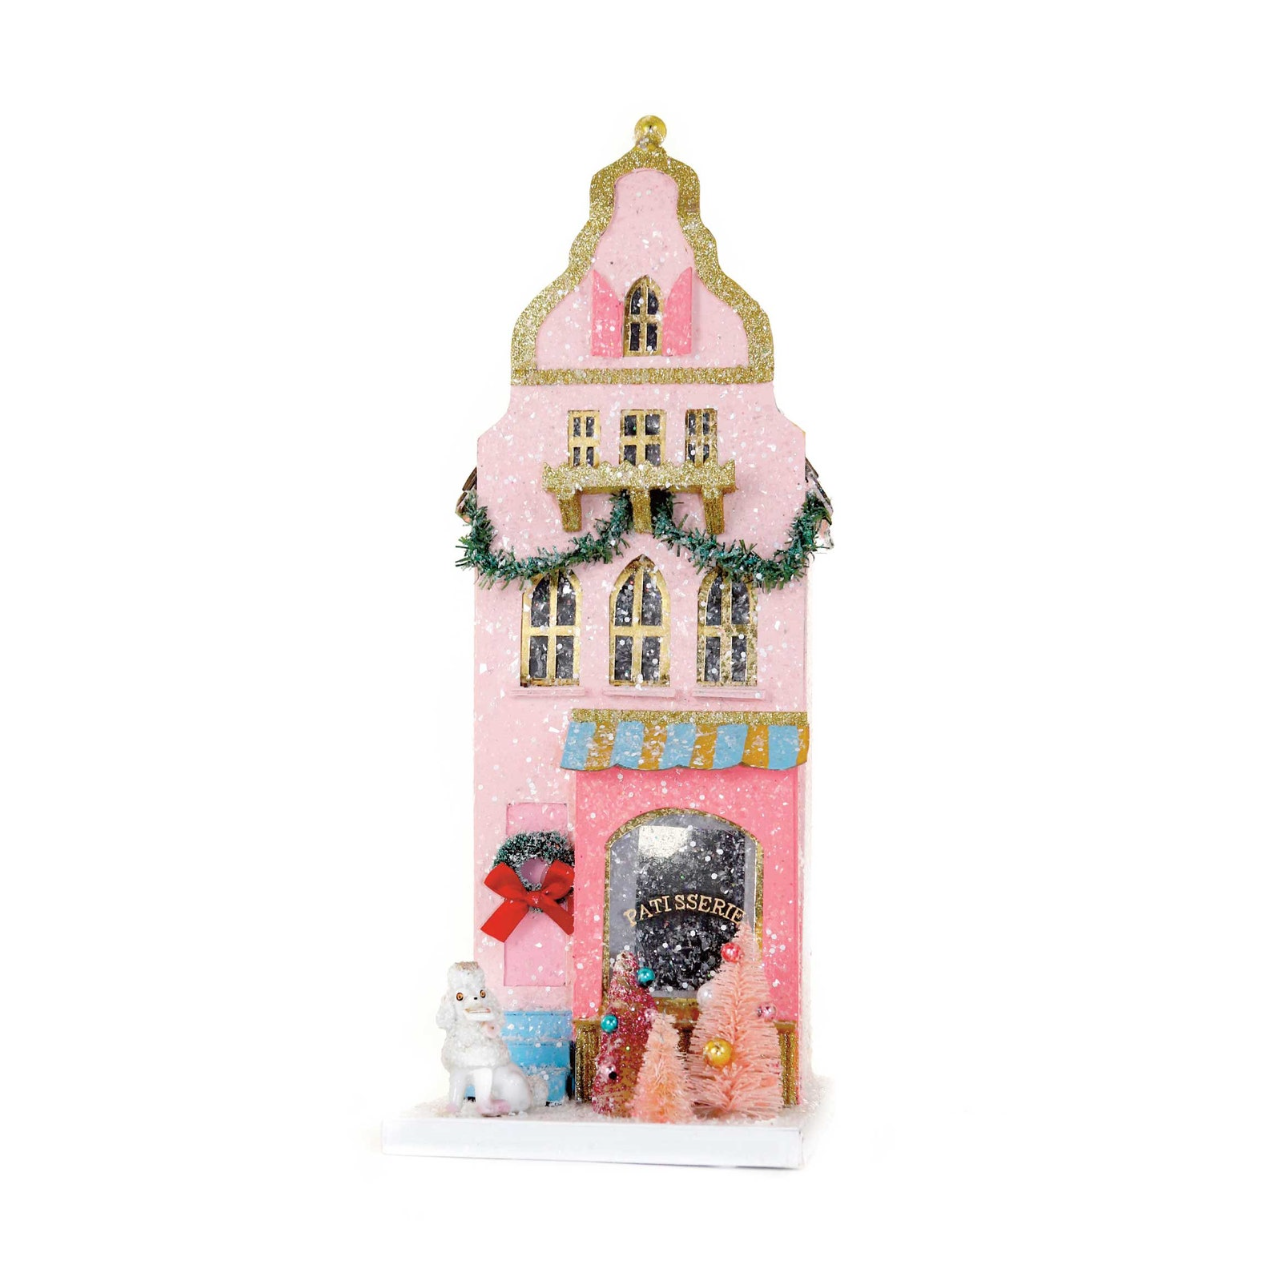 Patiserie Collectable House